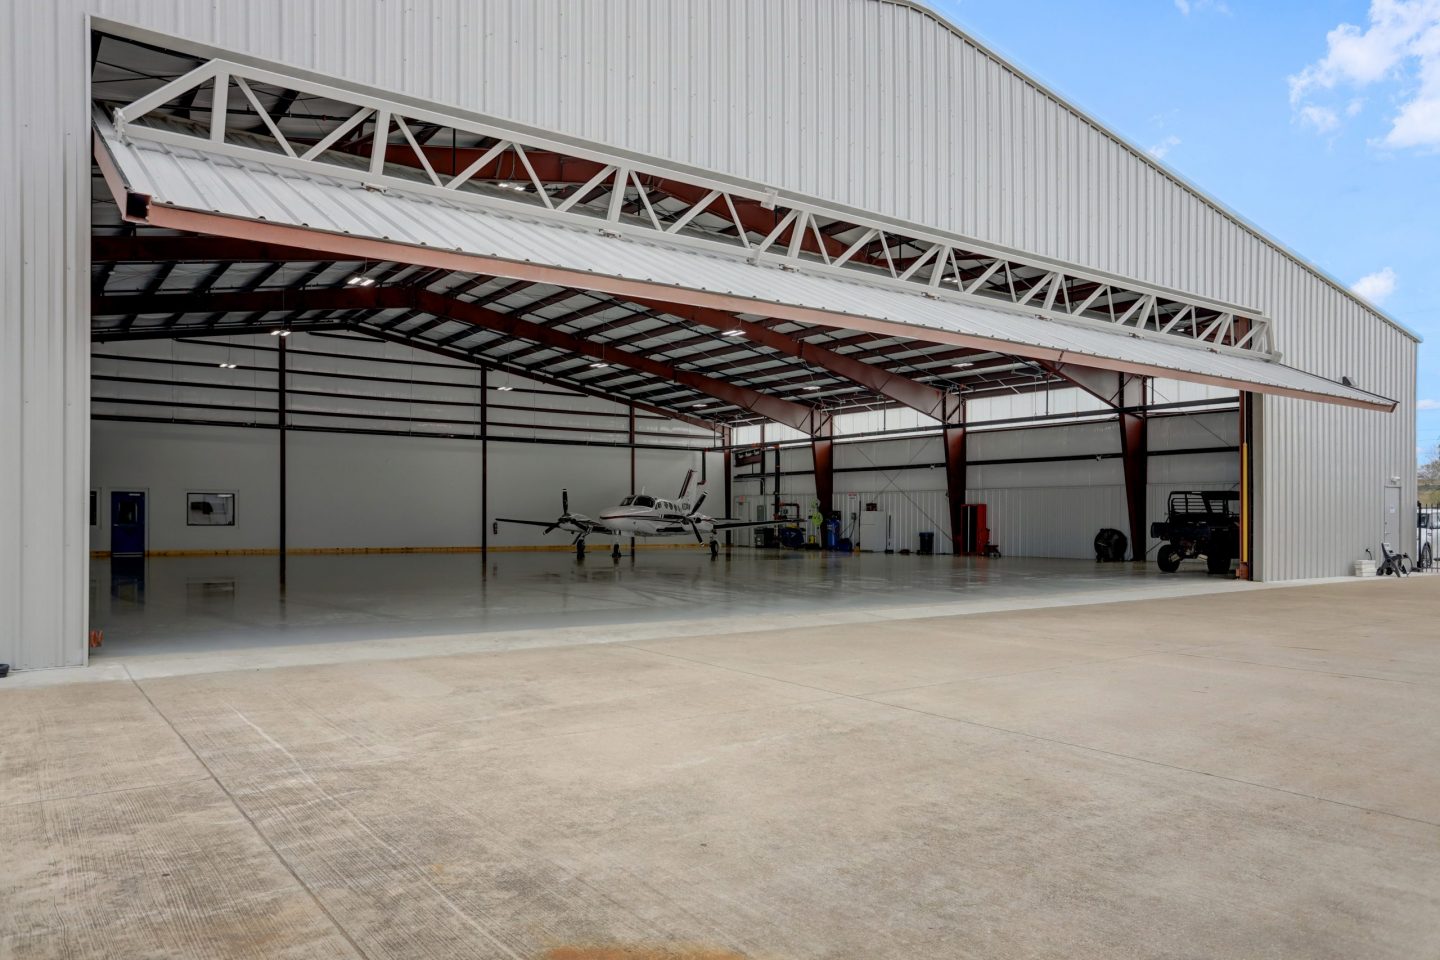 For Sale or Lease: 18,000-SF Hangar and Office on SH 6 at Sugar Land Airport (SGR)